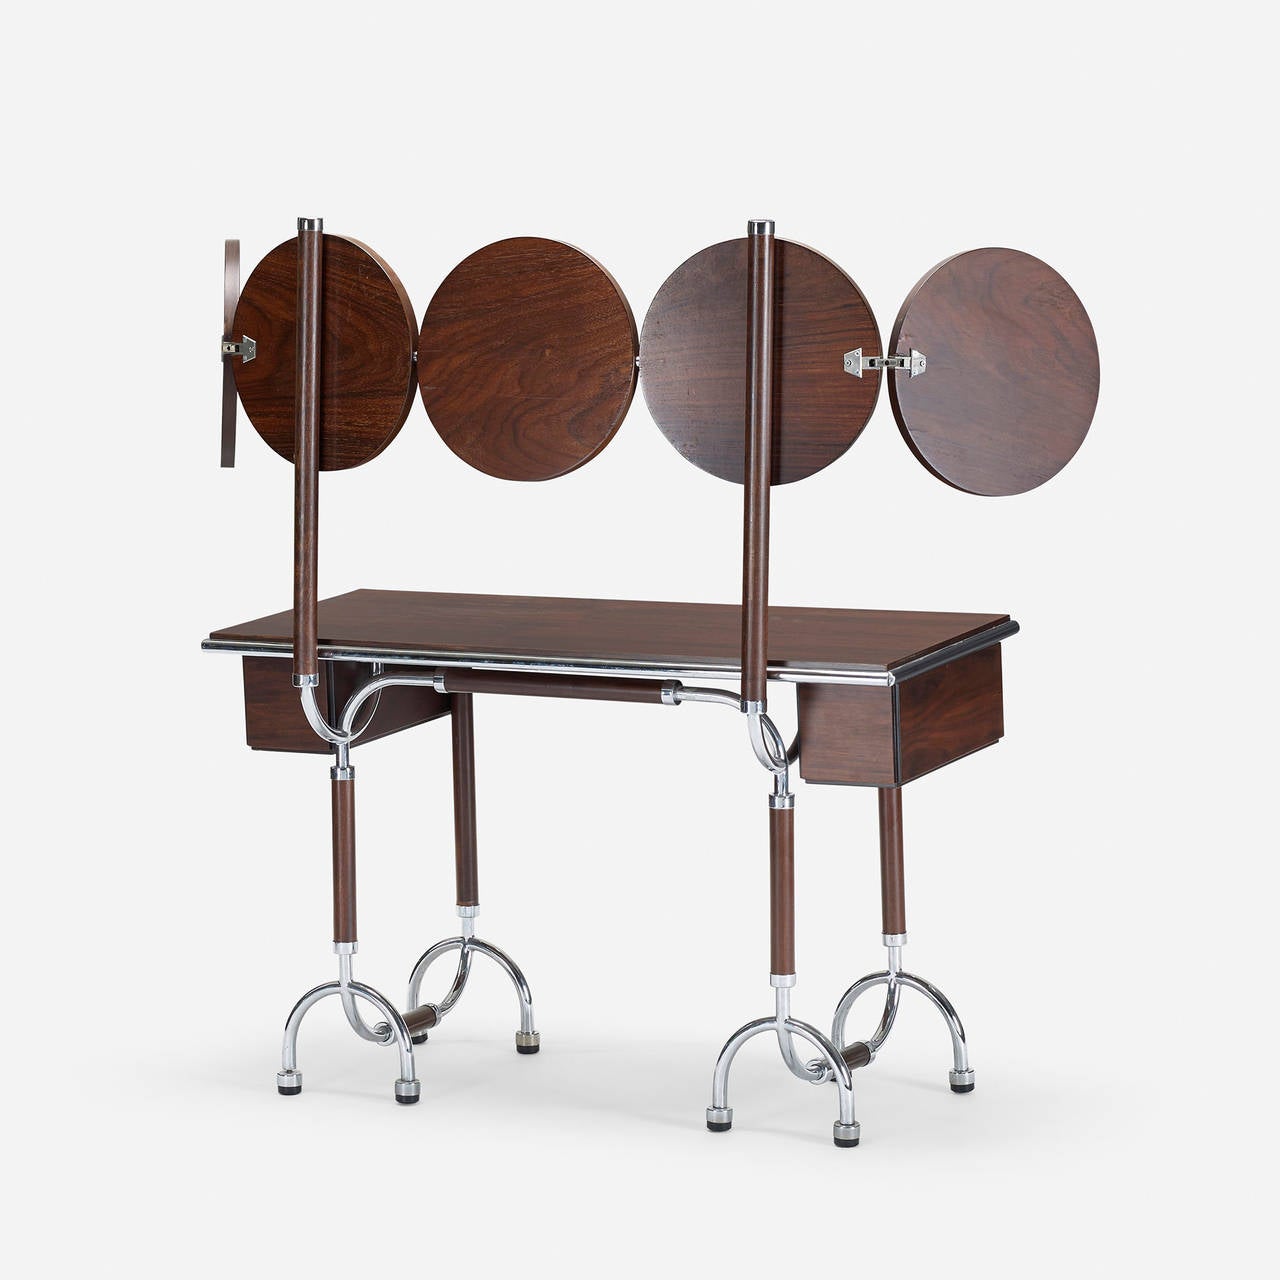 Vanity features pivoting central mirror, two fixed mirrors and two flanking adjustable mirrors above two drawers.

PROVENANCE - Wright, Modernist 20th Century, 22 May 2005, Lot 138 | Important private collection

LITERATURE - Gabetti e Isola